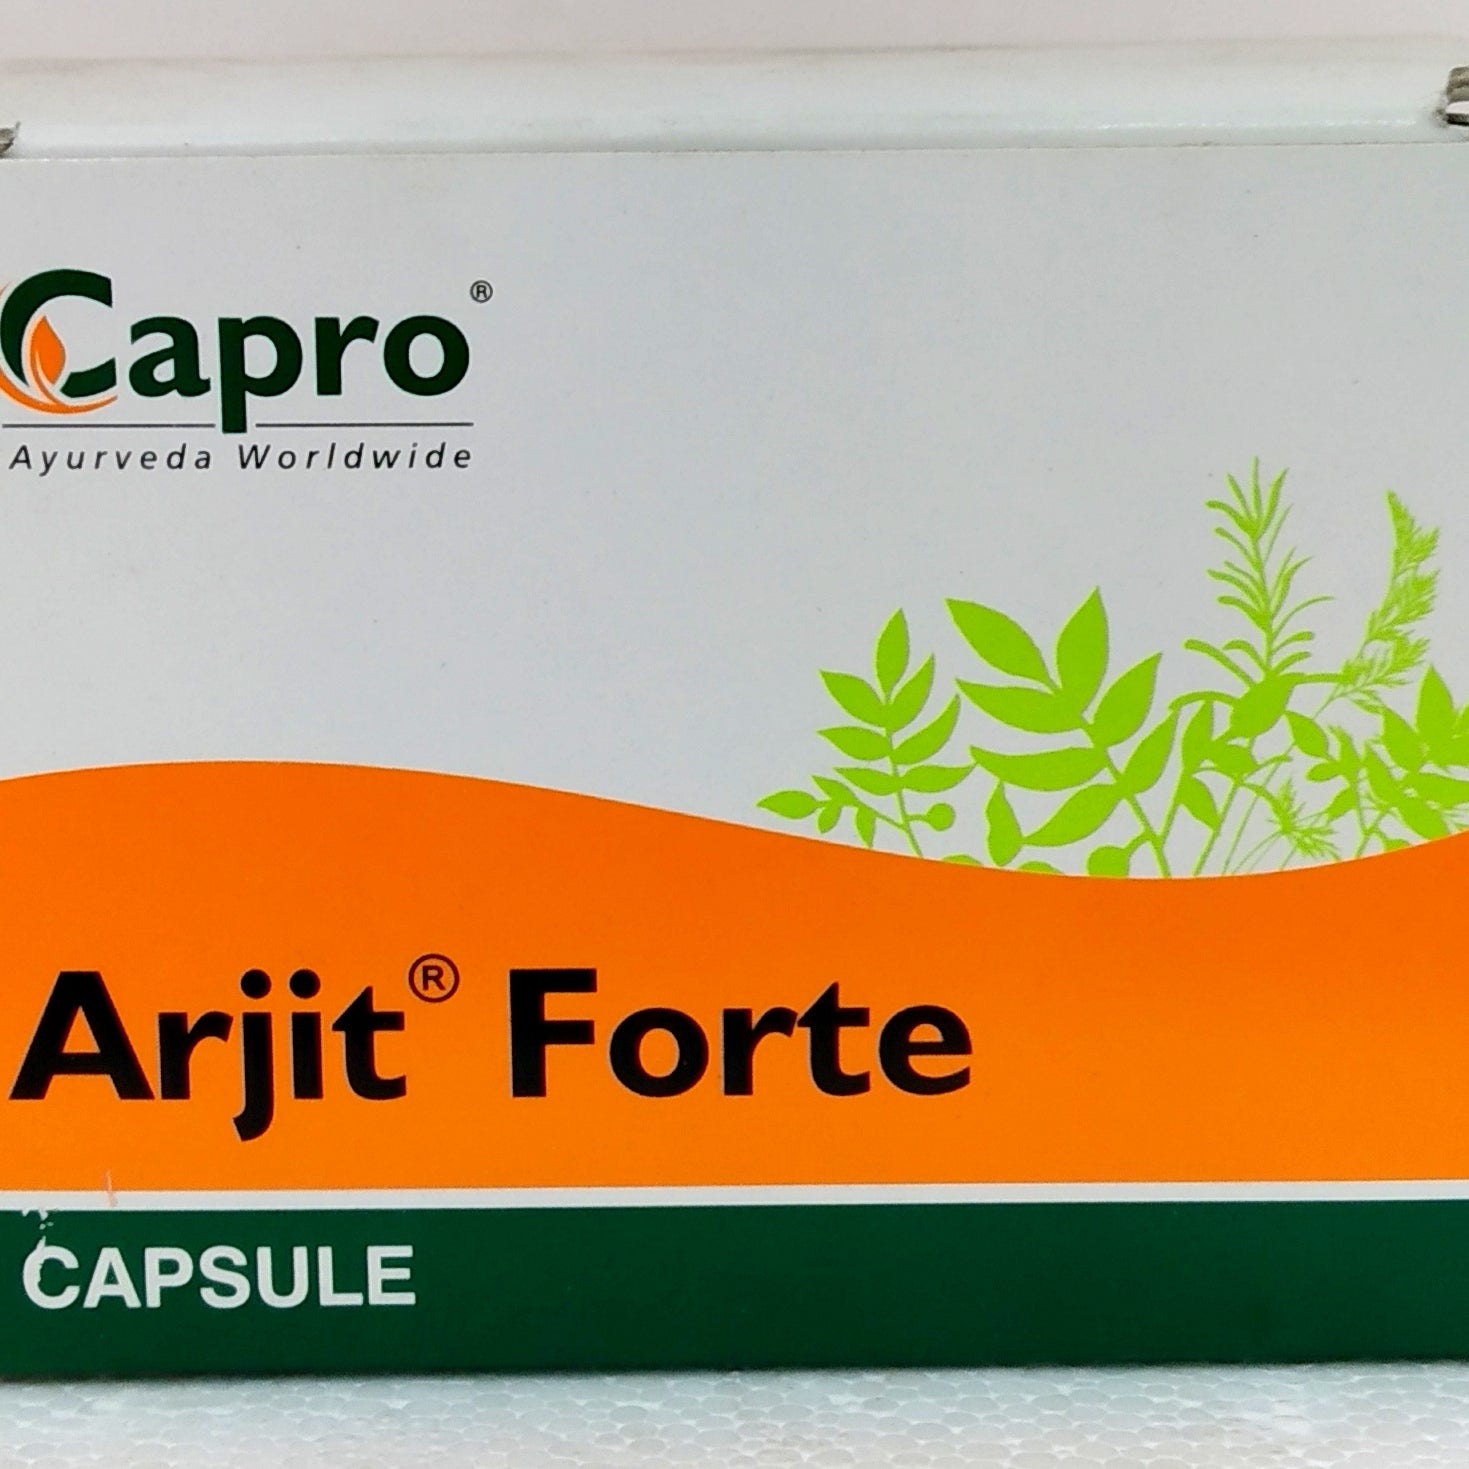 Shop Arjit Forte 10Capsules at price 55.00 from Capro Online - Ayush Care